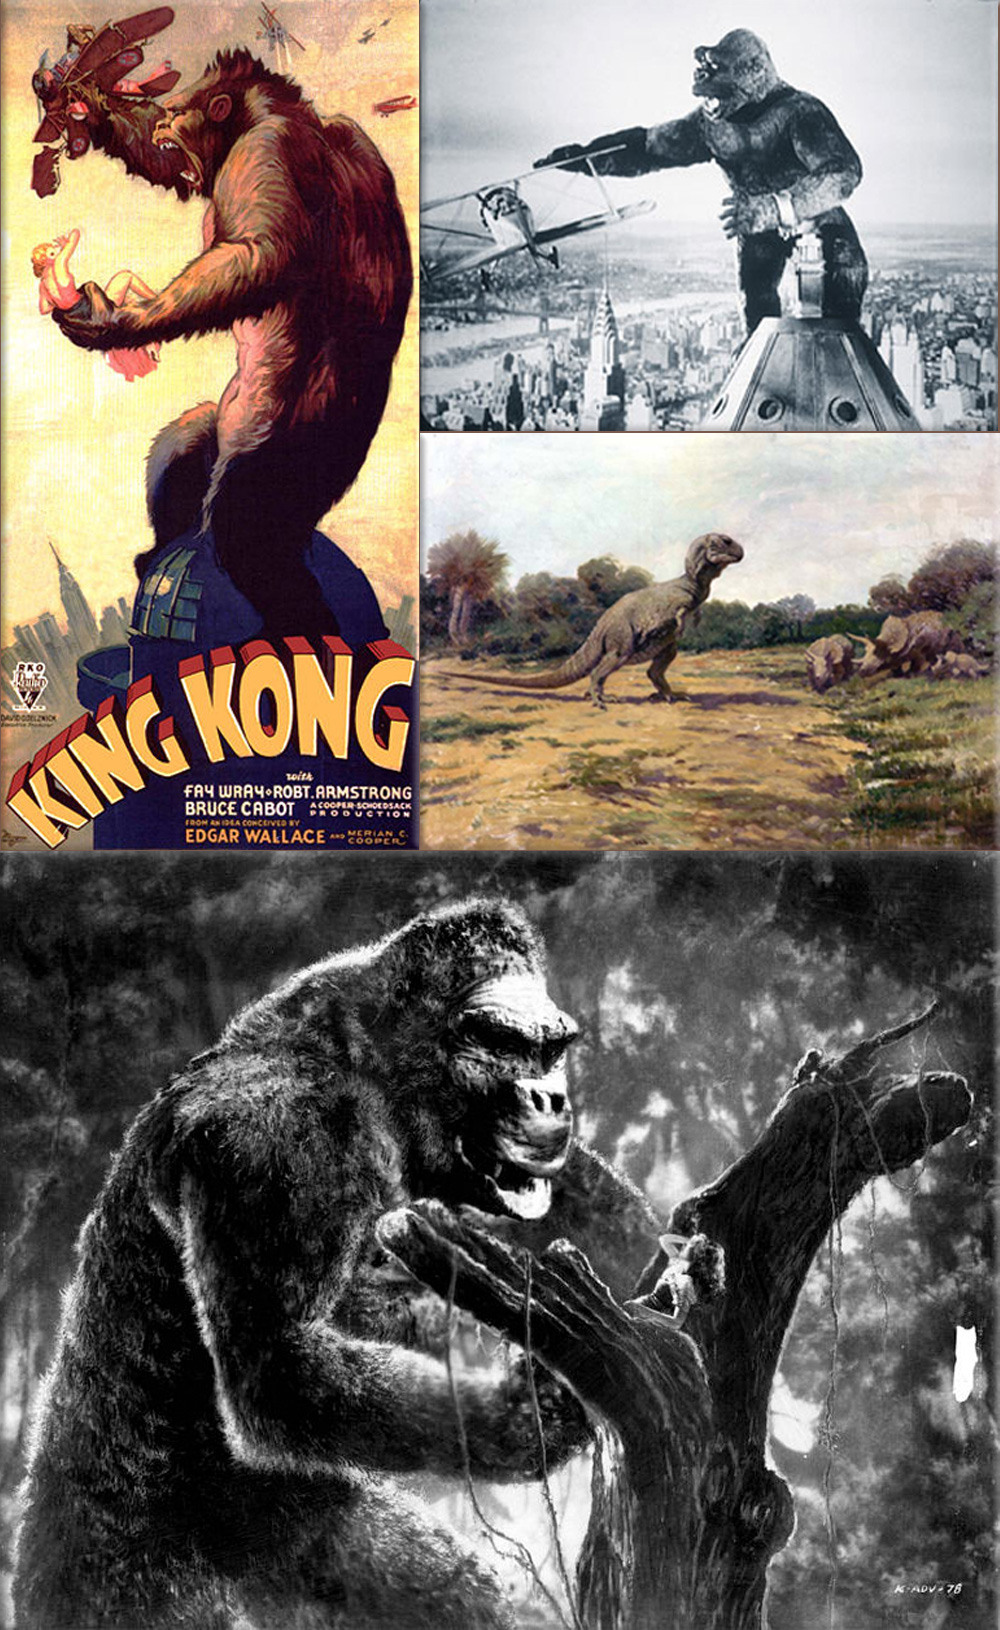 King Kong is a Pre-Code 1933 Giant monster Adventure film directed and produced by Merian C. Cooper and Ernest B. Schoedsack